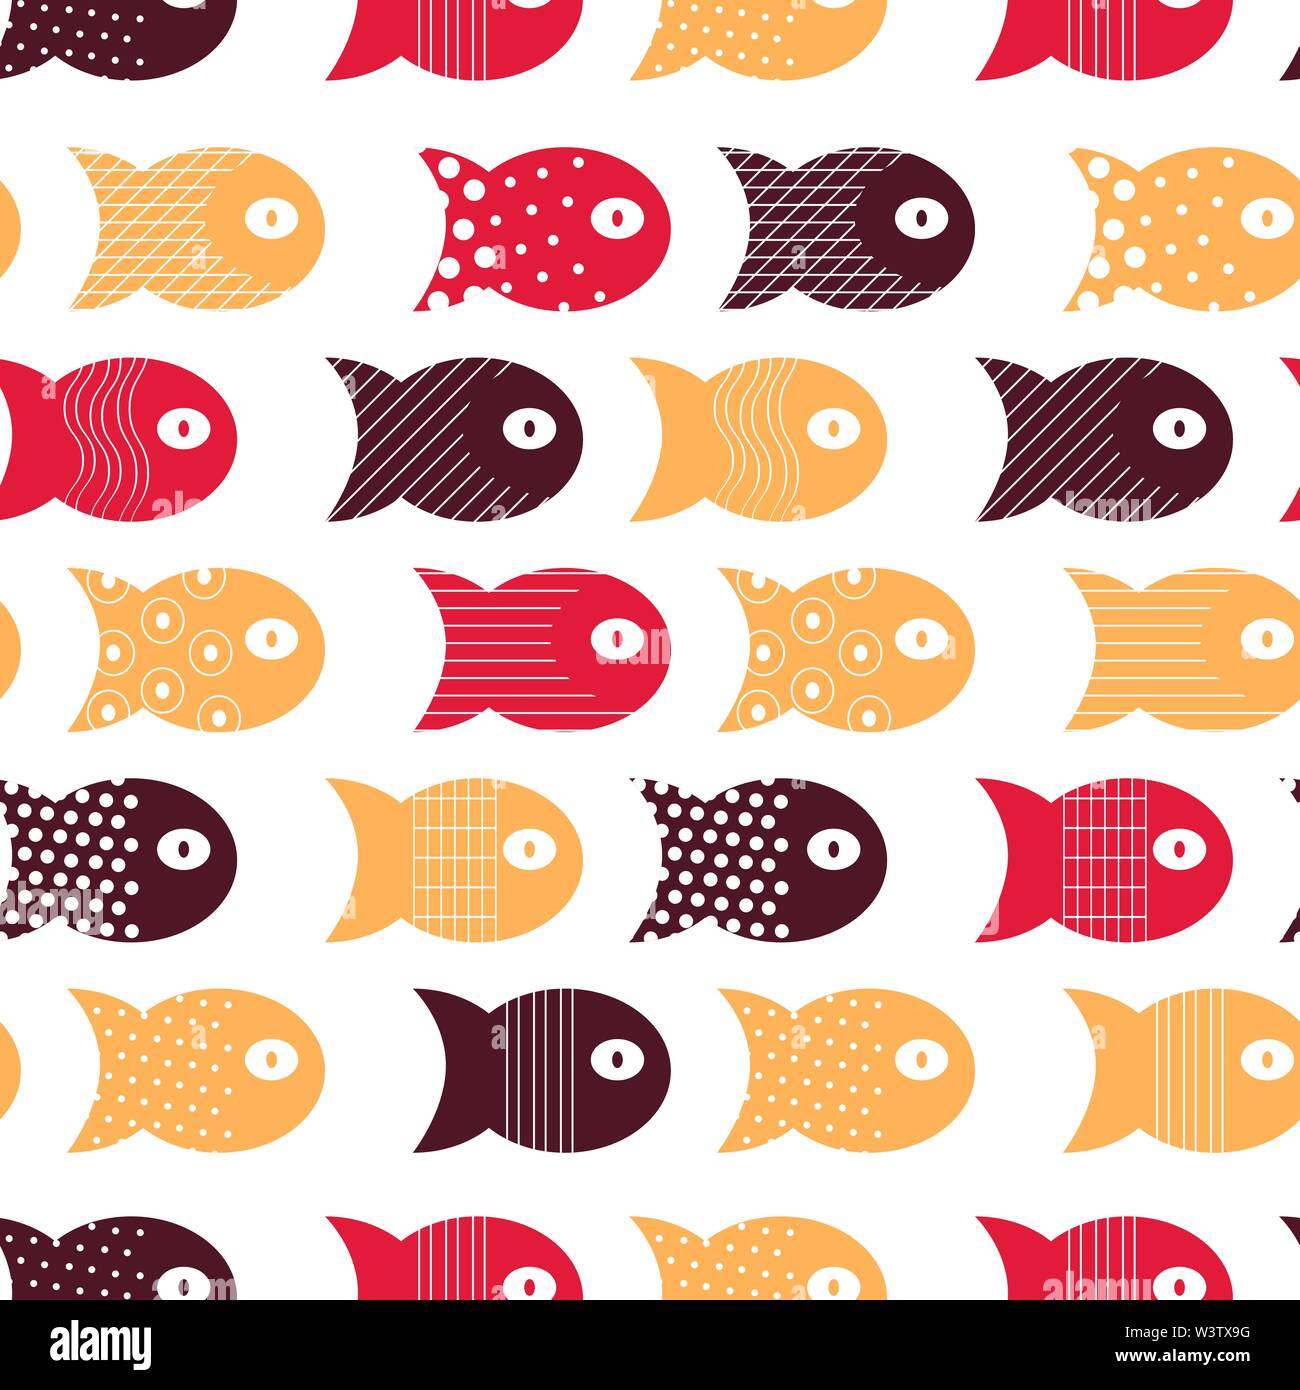 Fish seamless pattern for fabric textile design, pillows